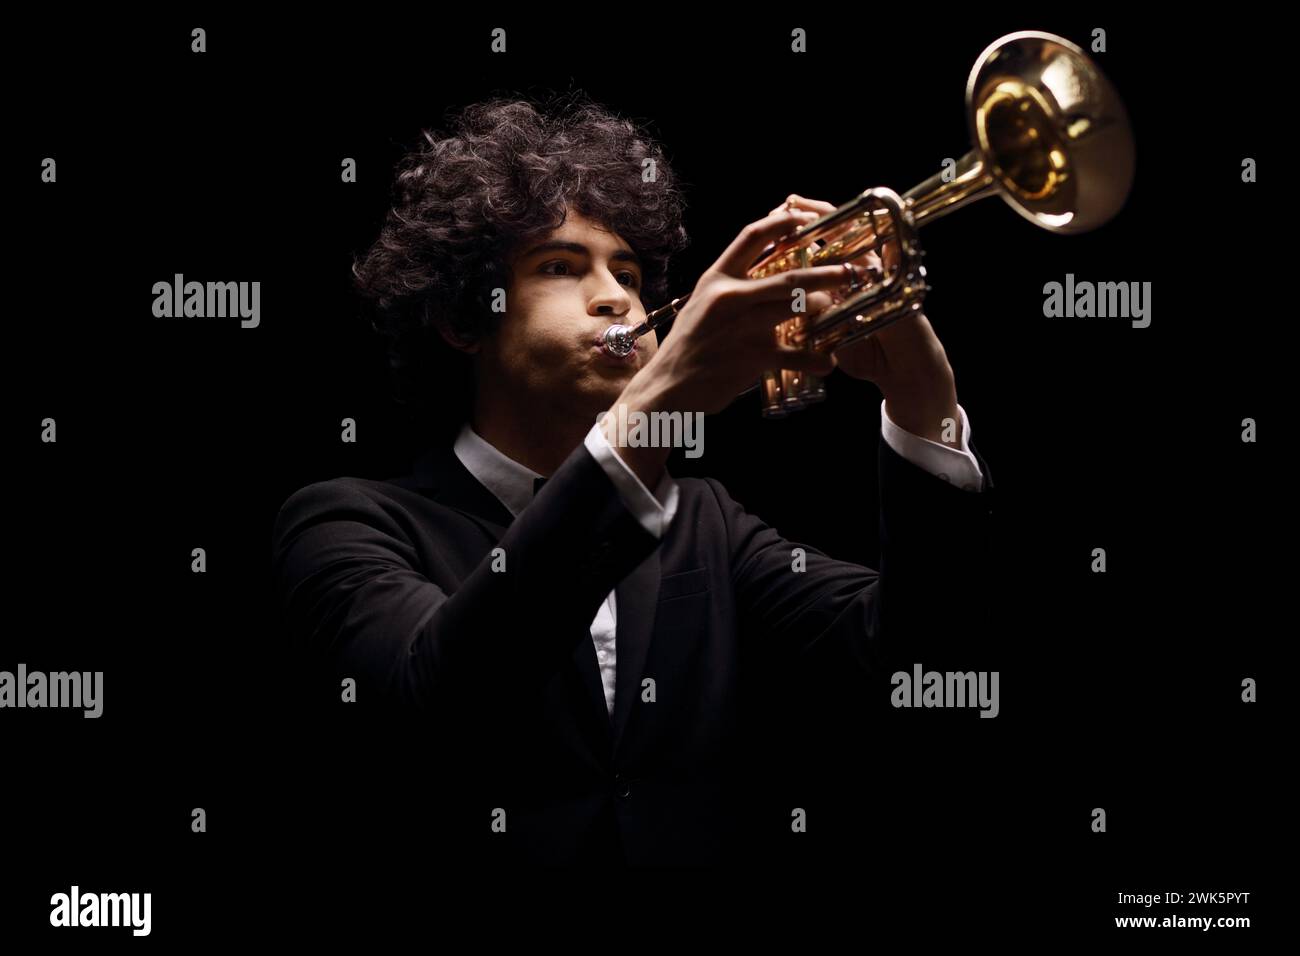 Young man in a black suit playing a trumpet isolated on black background Stock Photo